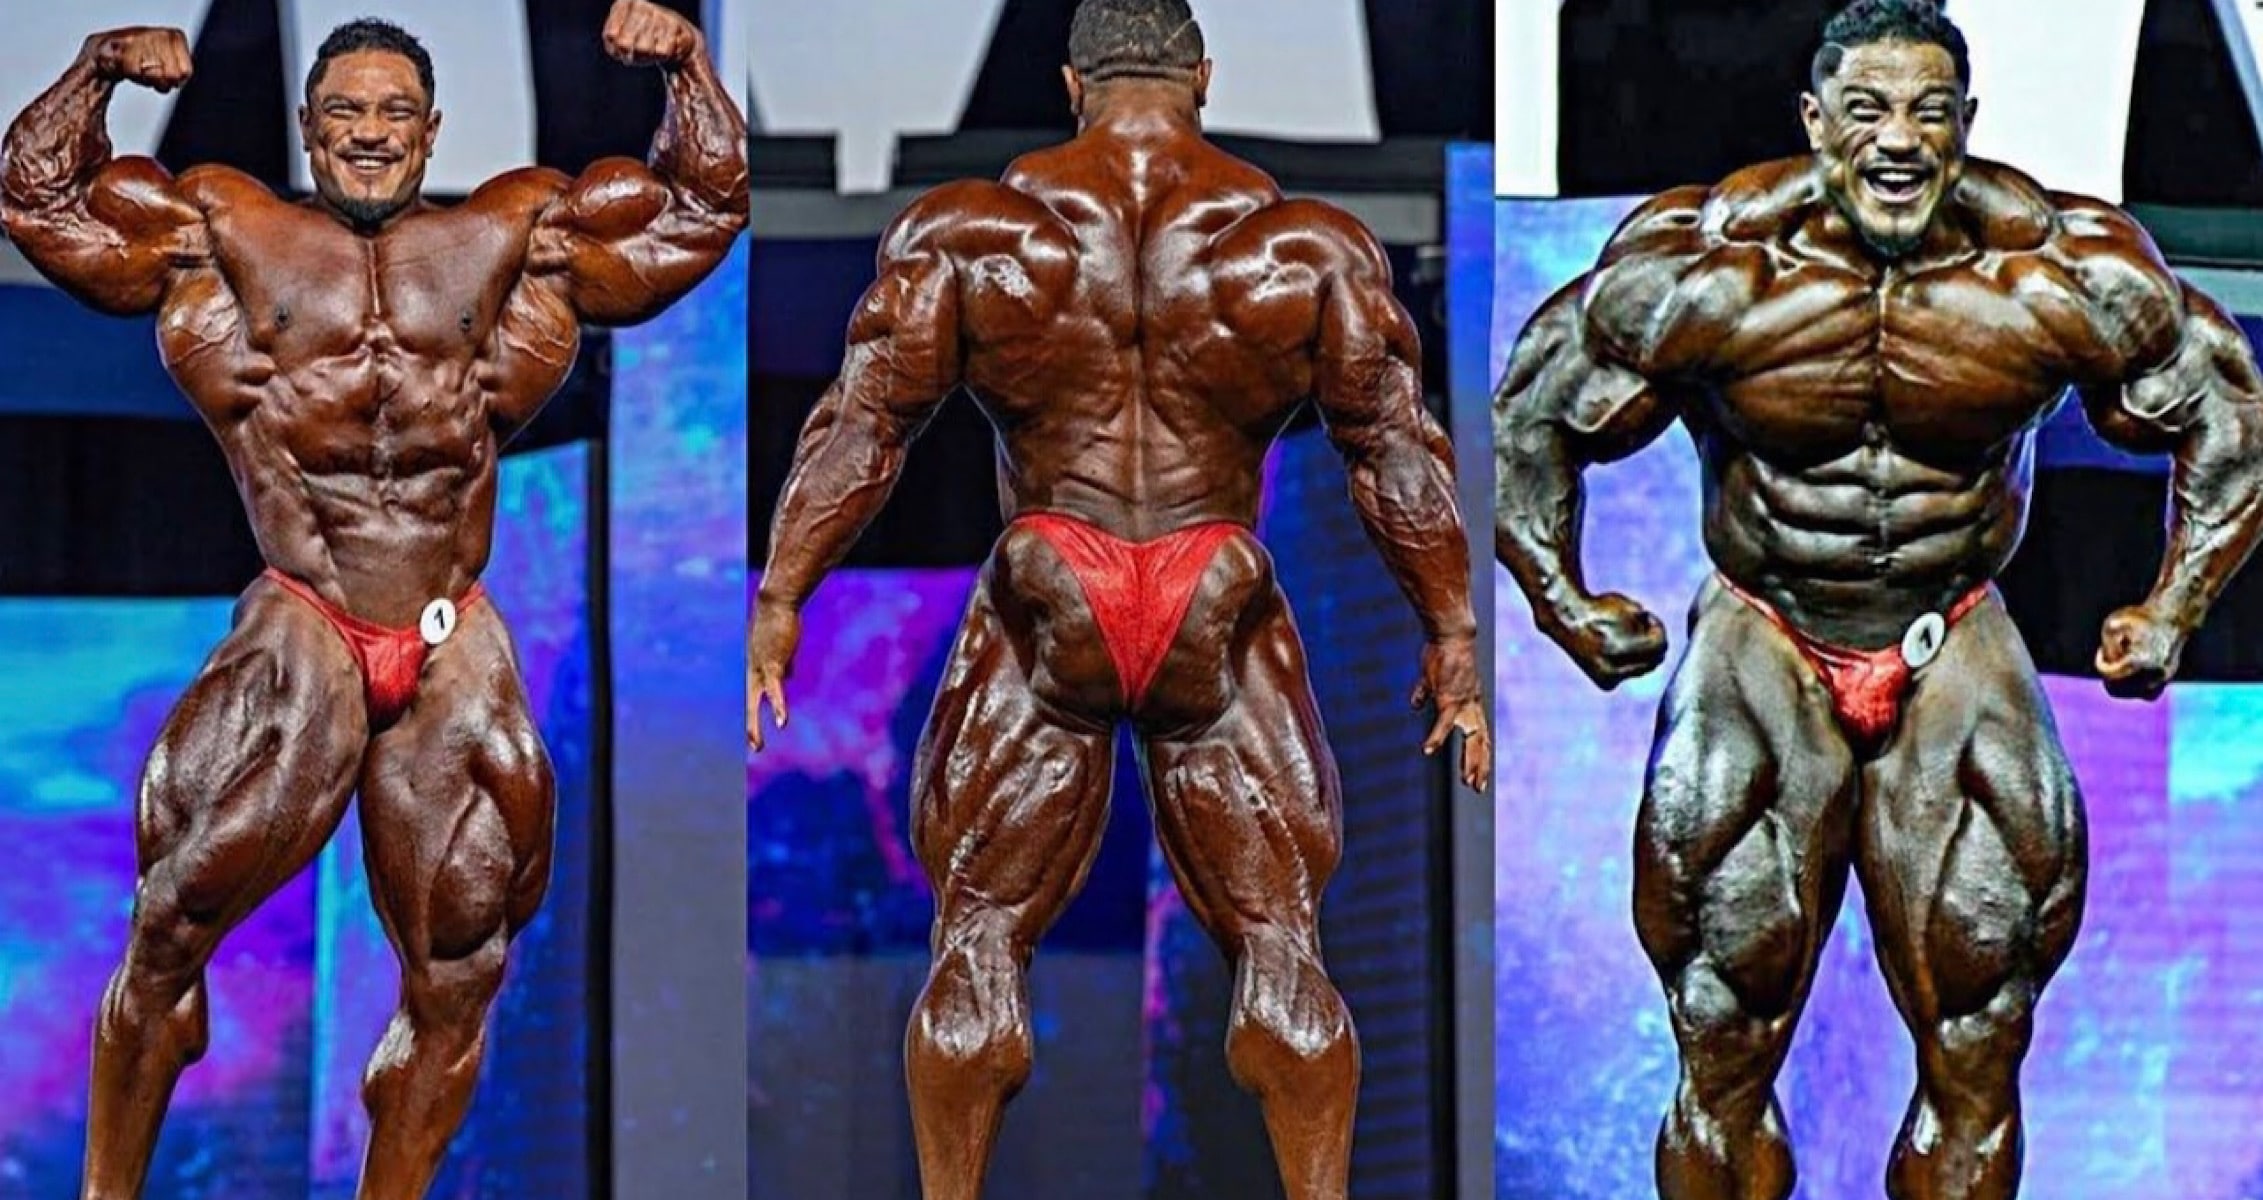 After Taking Second At The Europa Pro, Where Does Roelly Winklaar Go From Here?